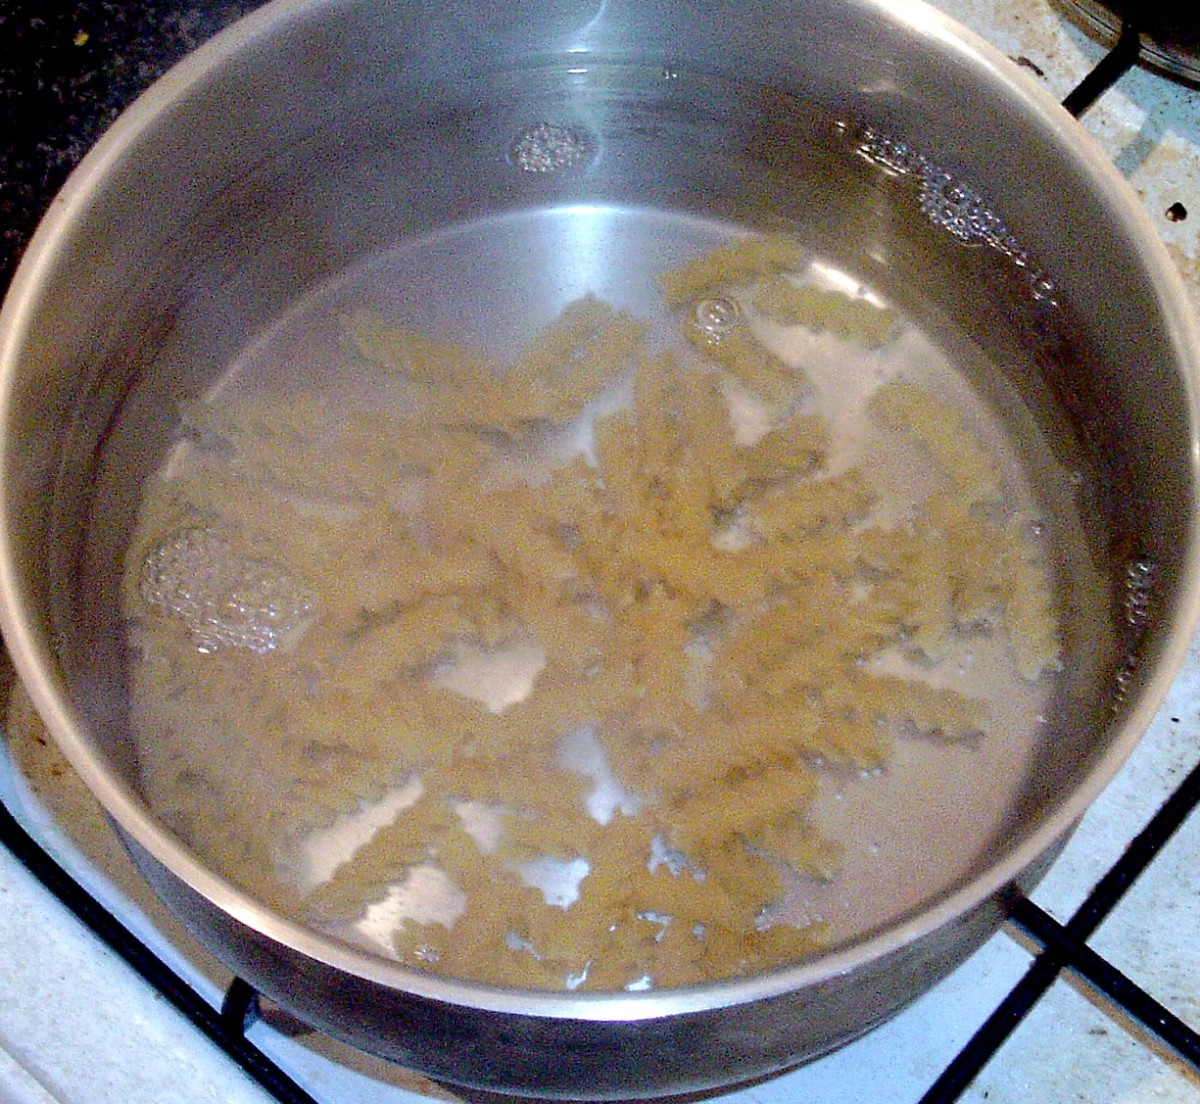 Fusilli pasta is added to boiling salted water.